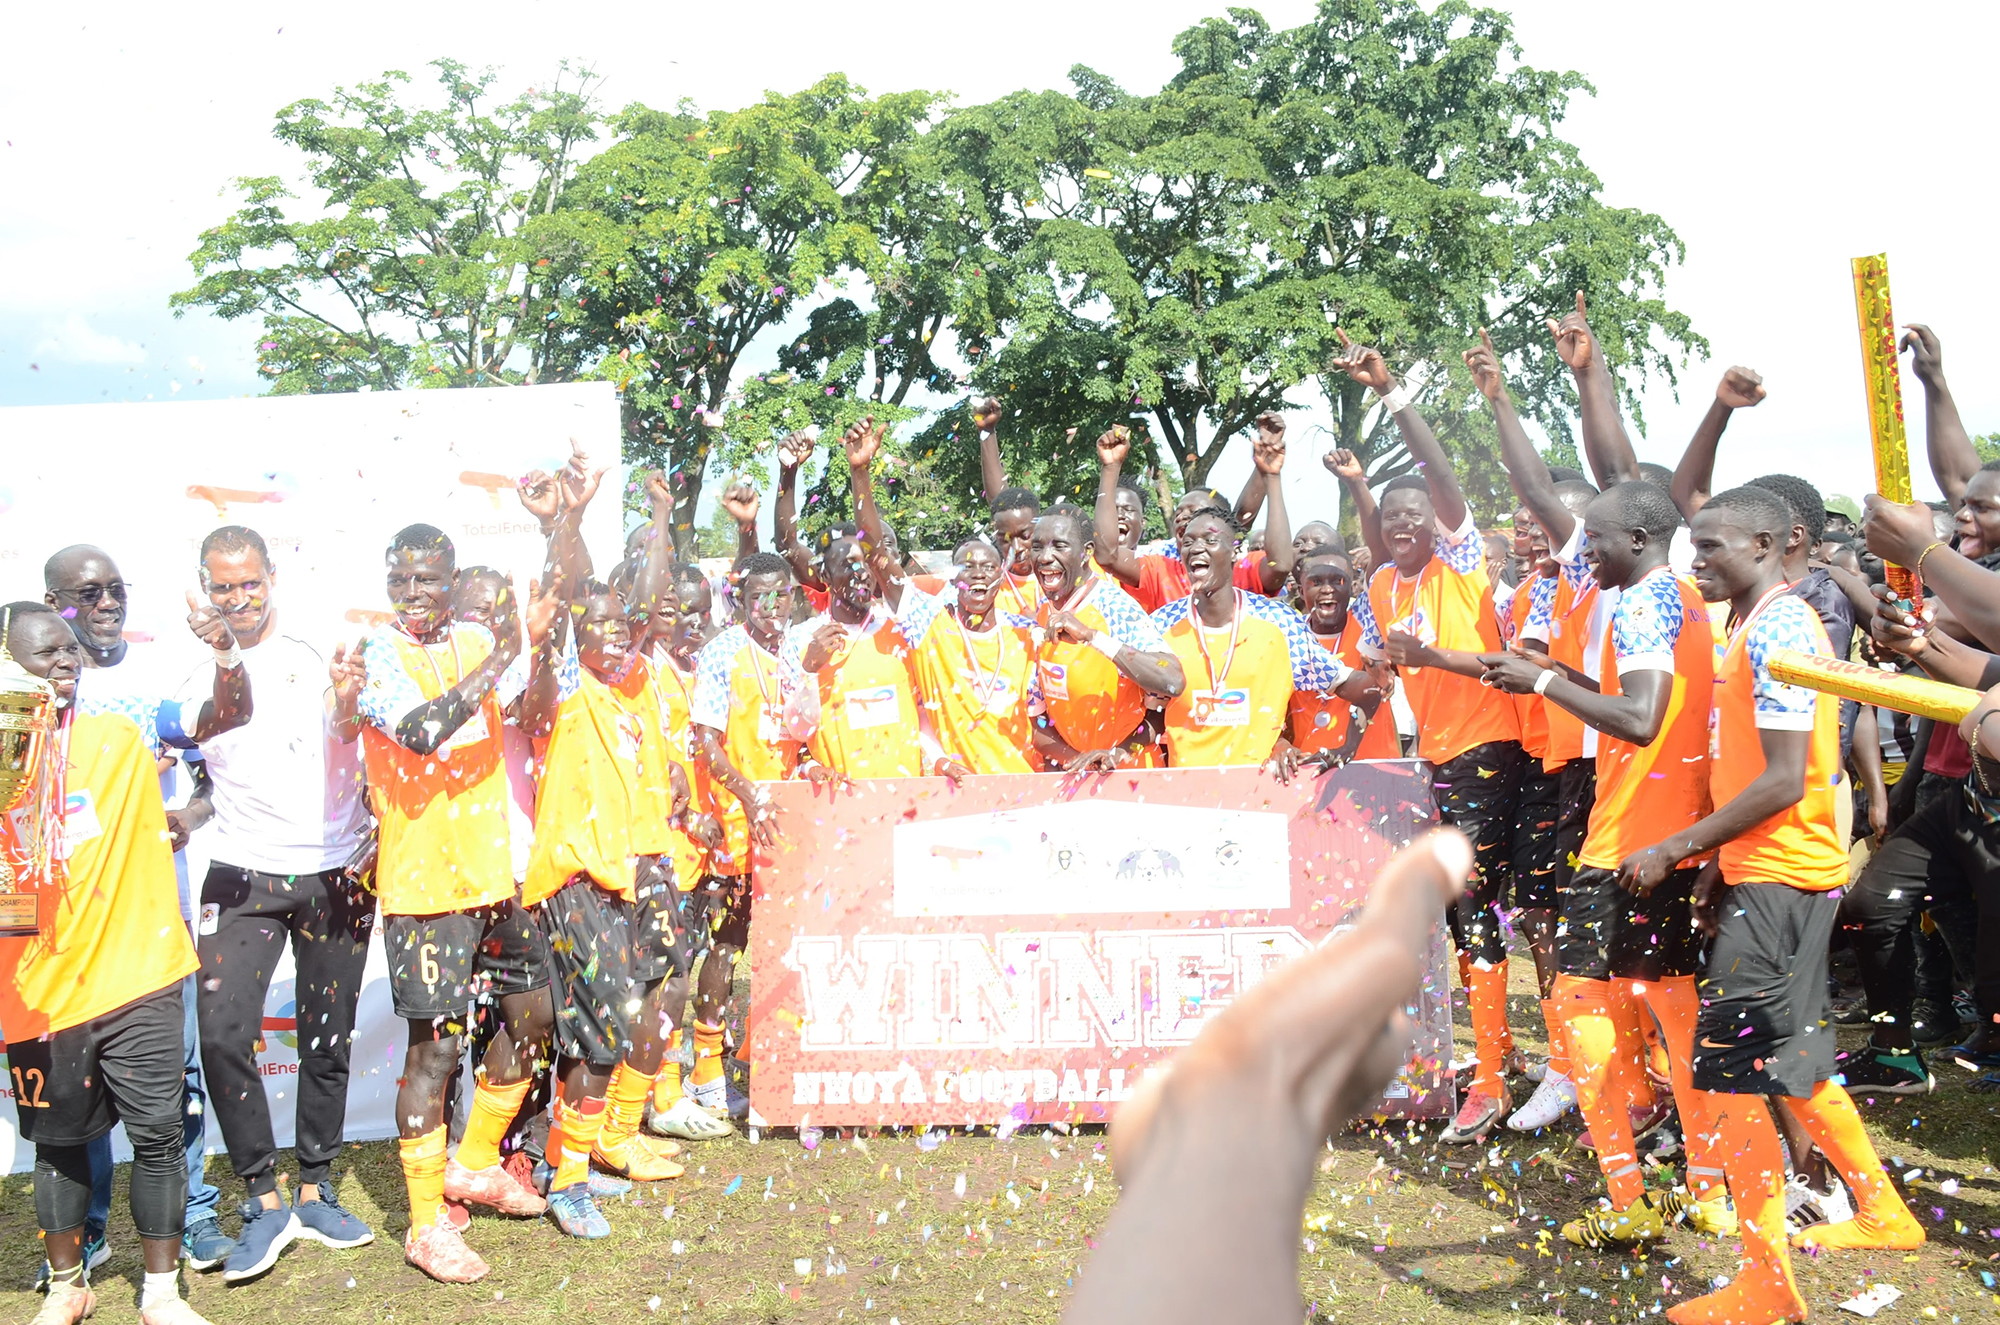 Young Elephant players celebrating after beating Black at Anaka Primary school playground